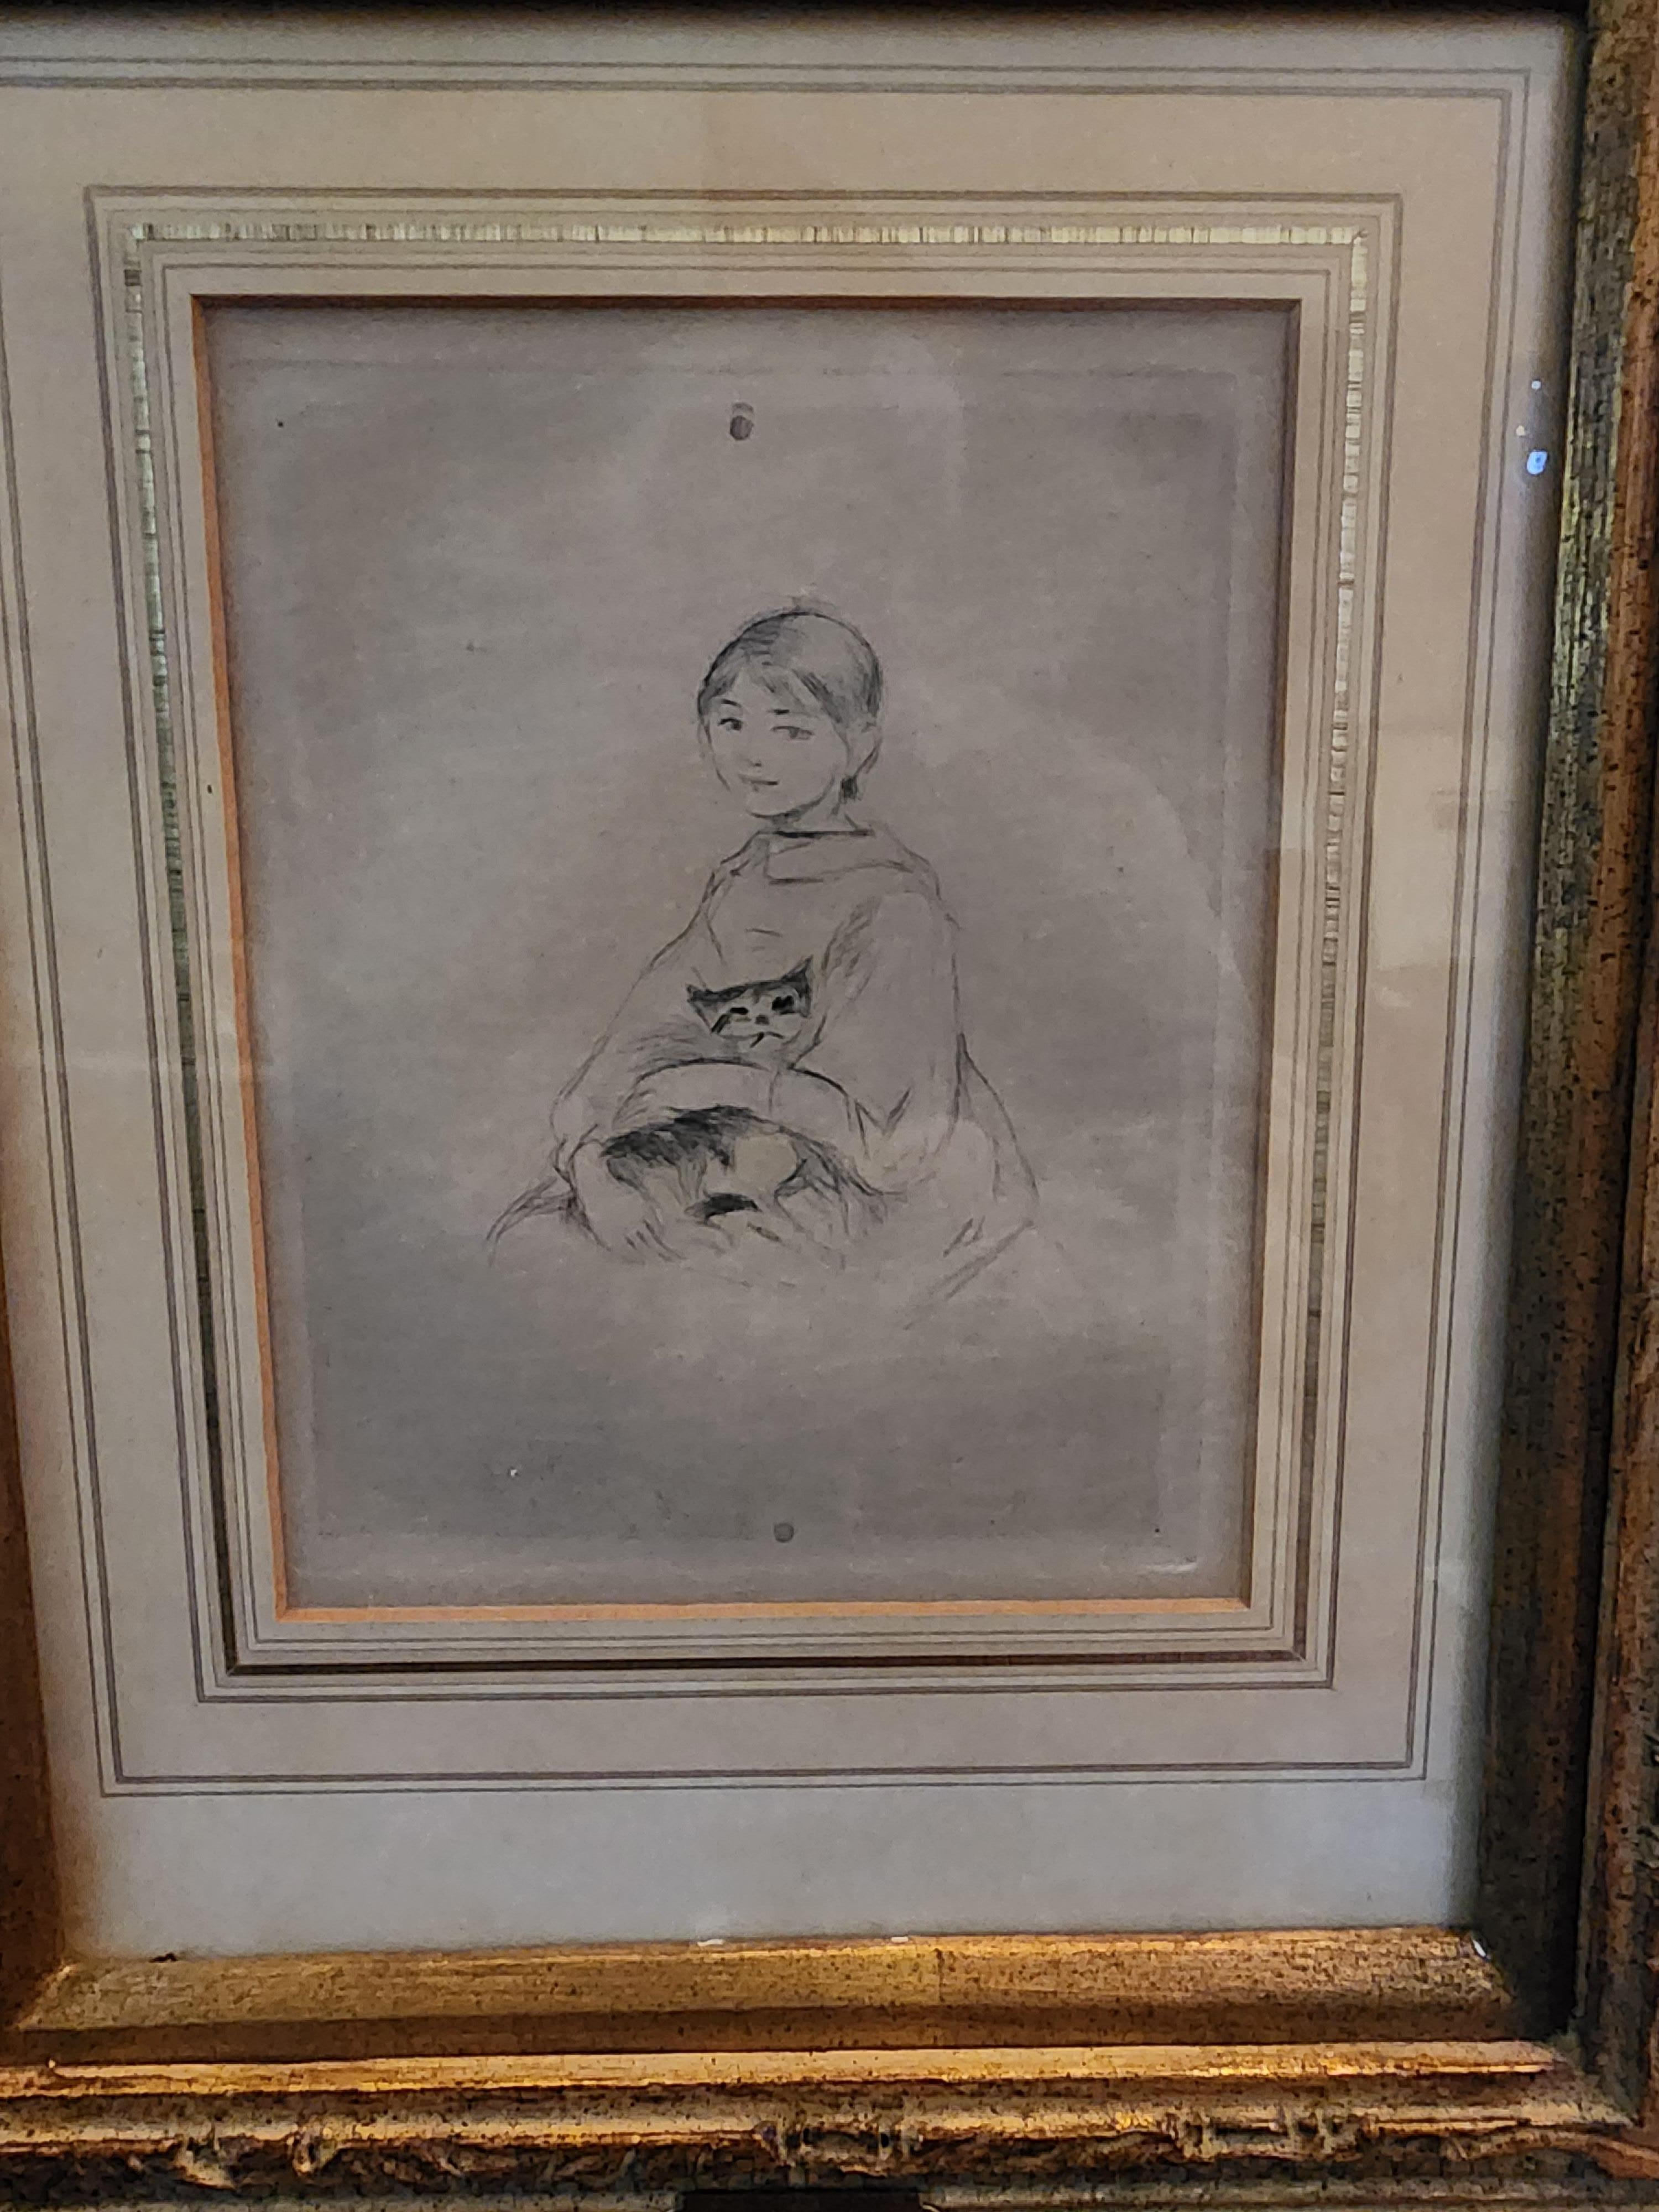 An excellent impression on lais paper.
This impression was printed after the plate was  cancelled.
The cancellation was done by punching two holes at the top and bottom edges of the plate which print as circles in the image.
Morisot only produced 8